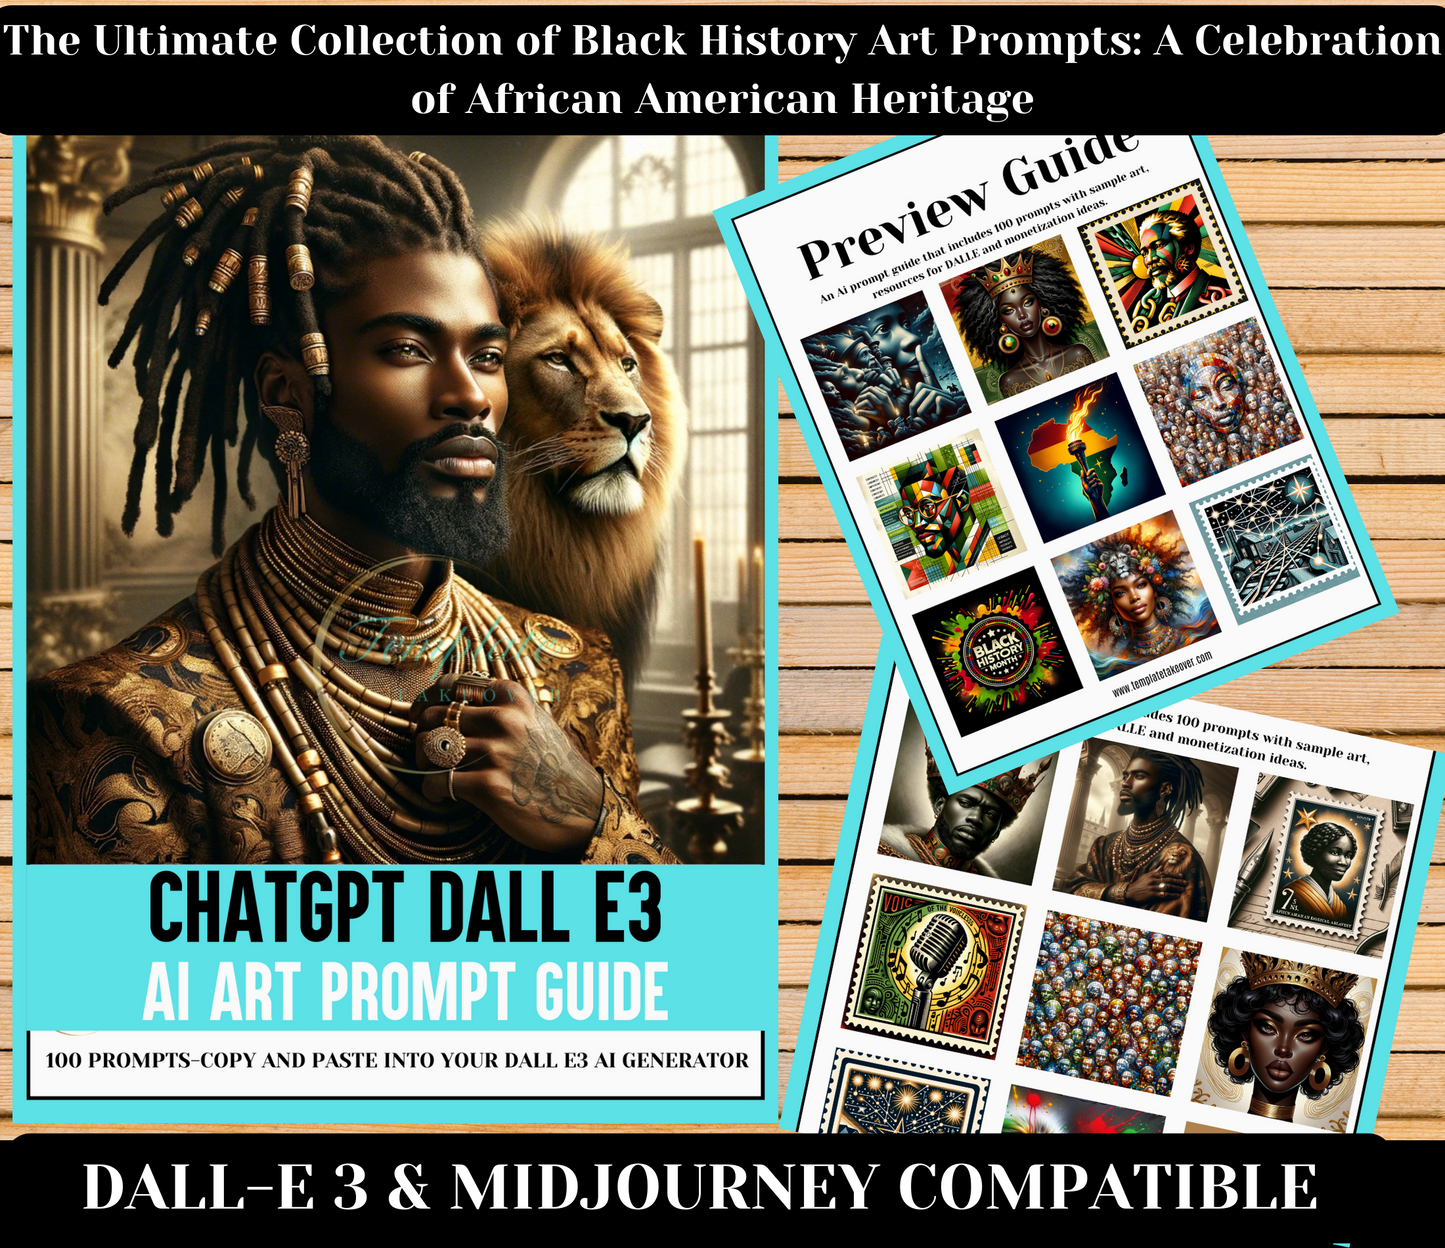 The Ultimate Collection of Black History Art Prompts: A Celebration of African American Heritage